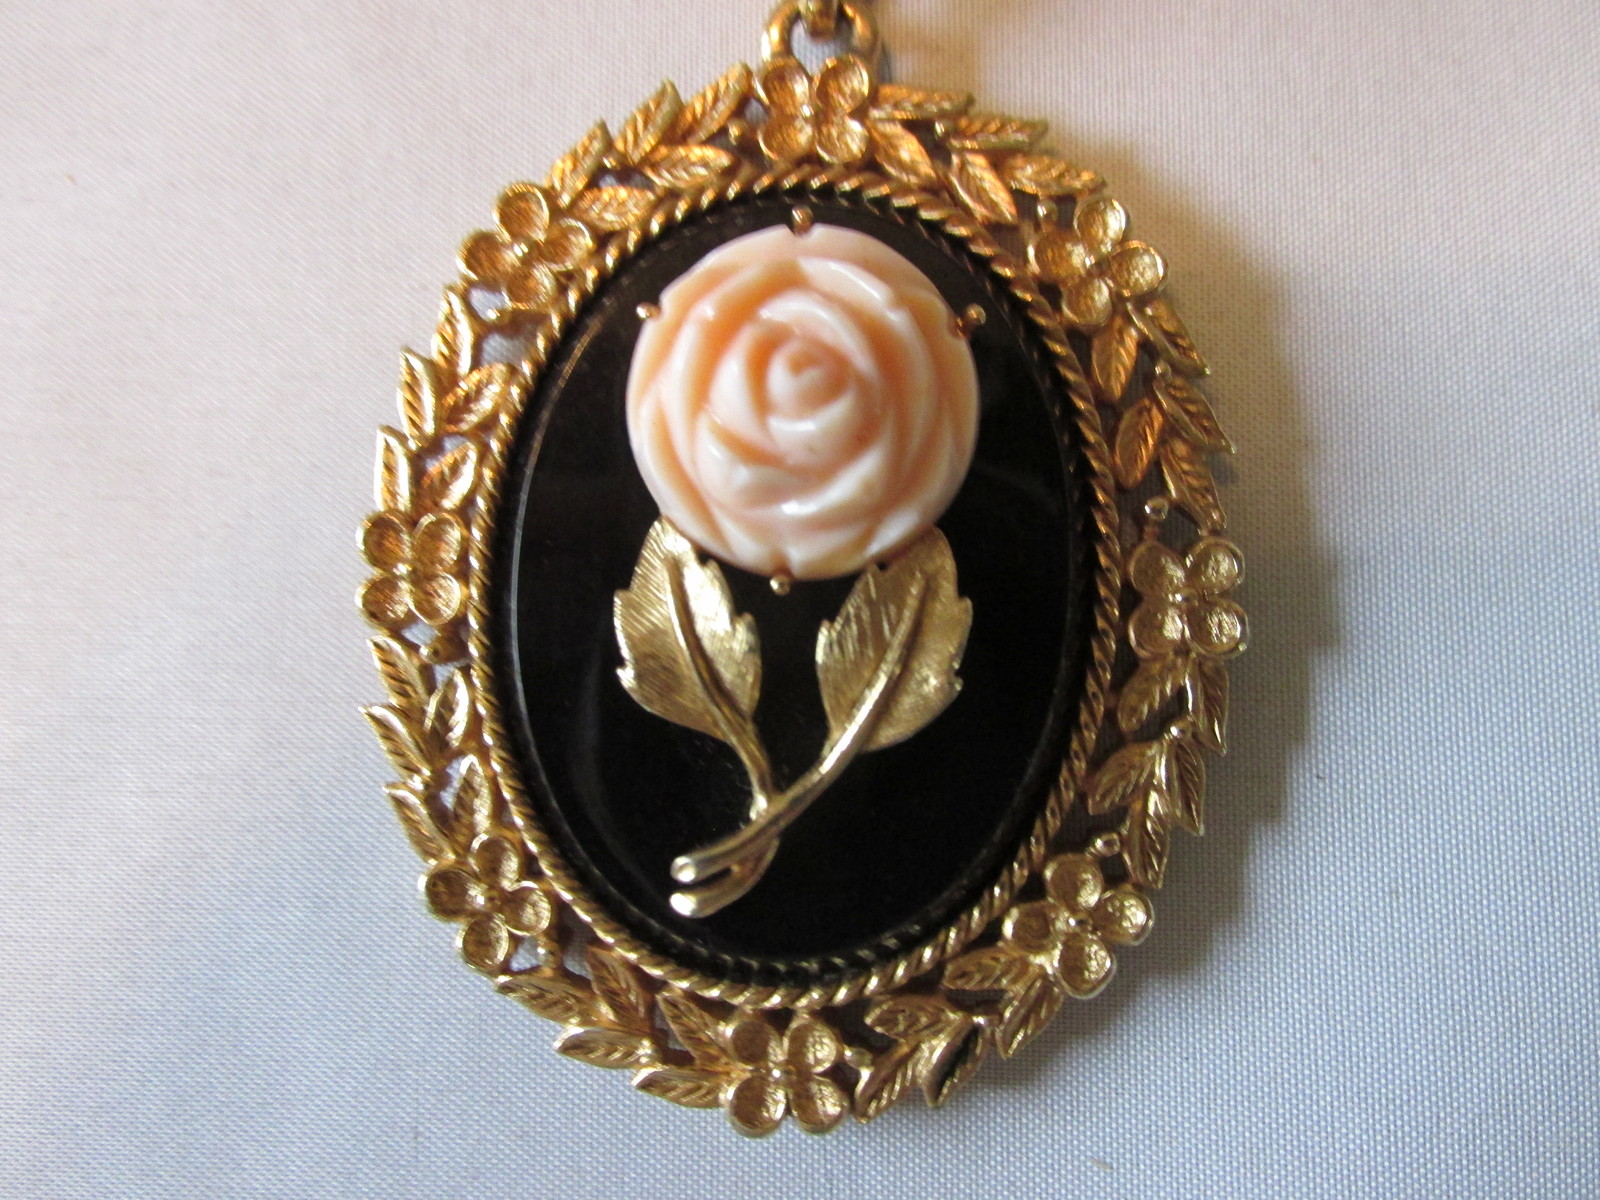 Primary image for Vintage Avon "Serena Rose" Reversible Pendant Necklace with Mirror, 1973